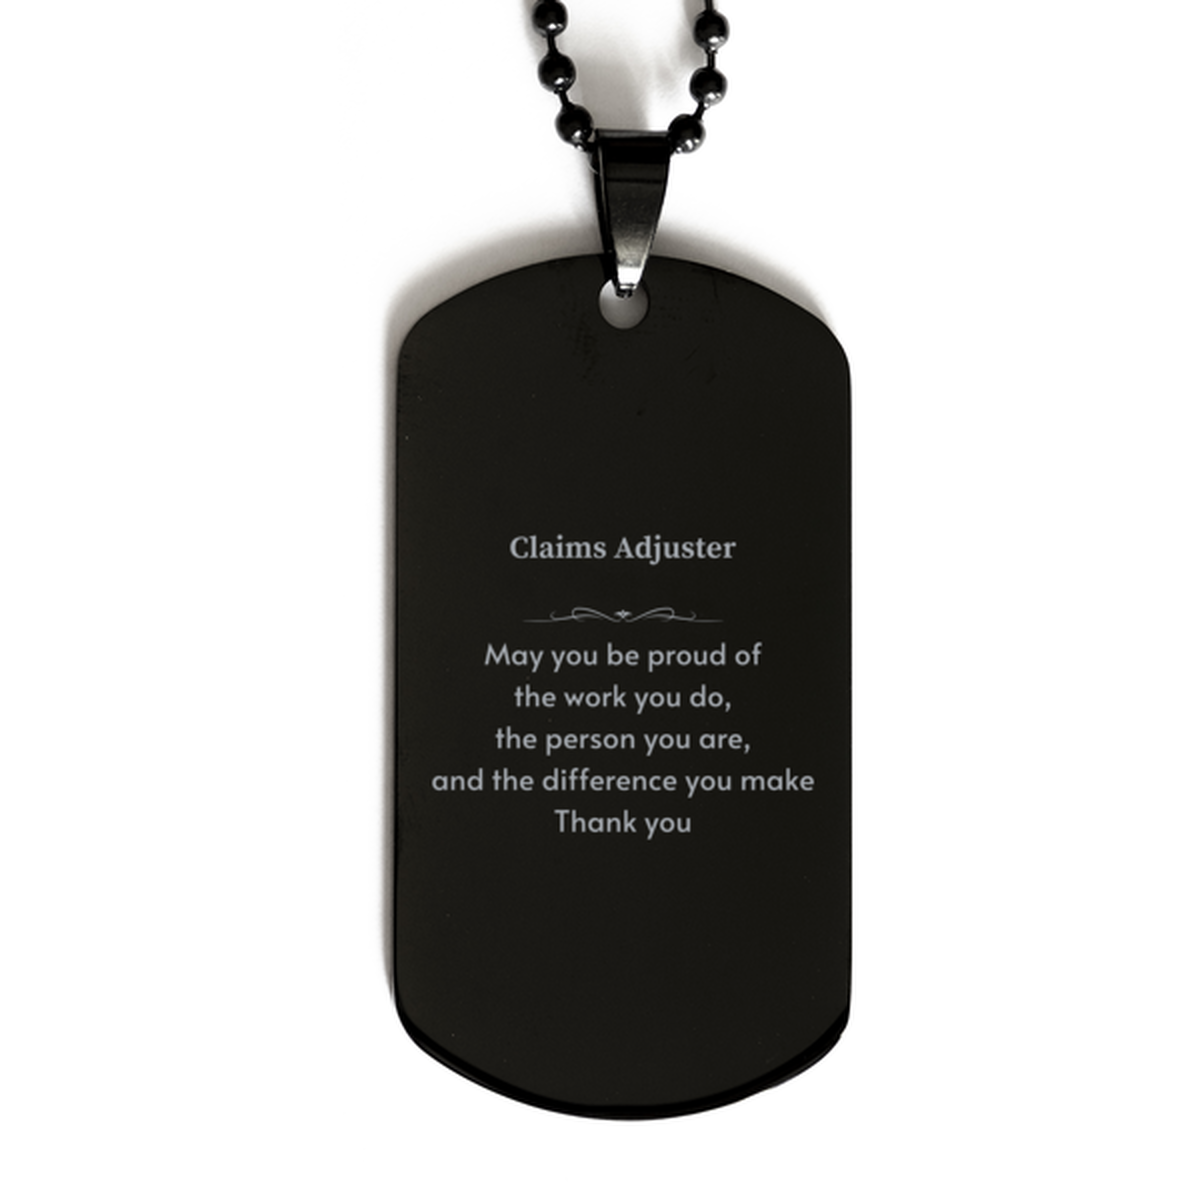 Heartwarming Black Dog Tag Retirement Coworkers Gifts for Claims Adjuster, Claims Adjuster May You be proud of the work you do, the person you are Gifts for Boss Men Women Friends